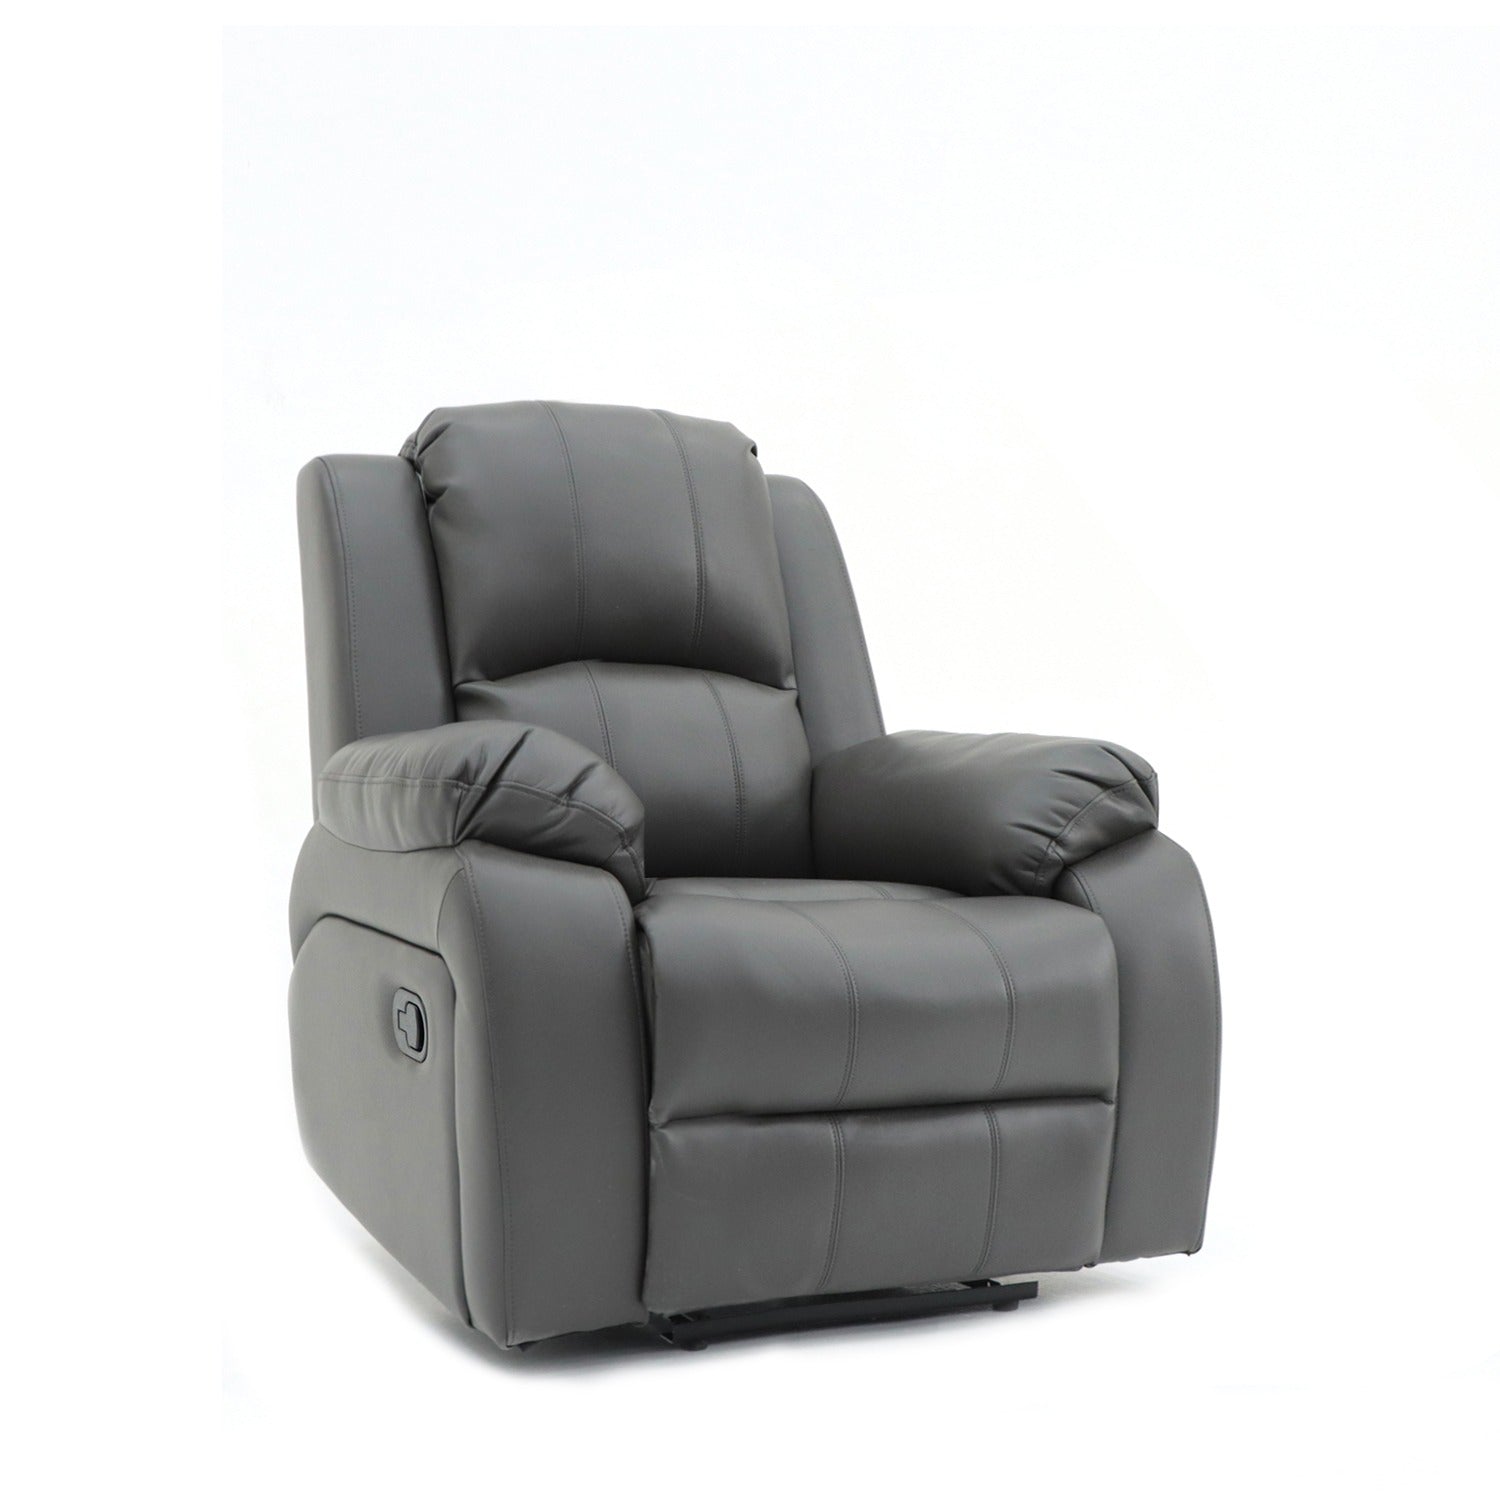 Darwin Power Recliner Chair Grey Leather